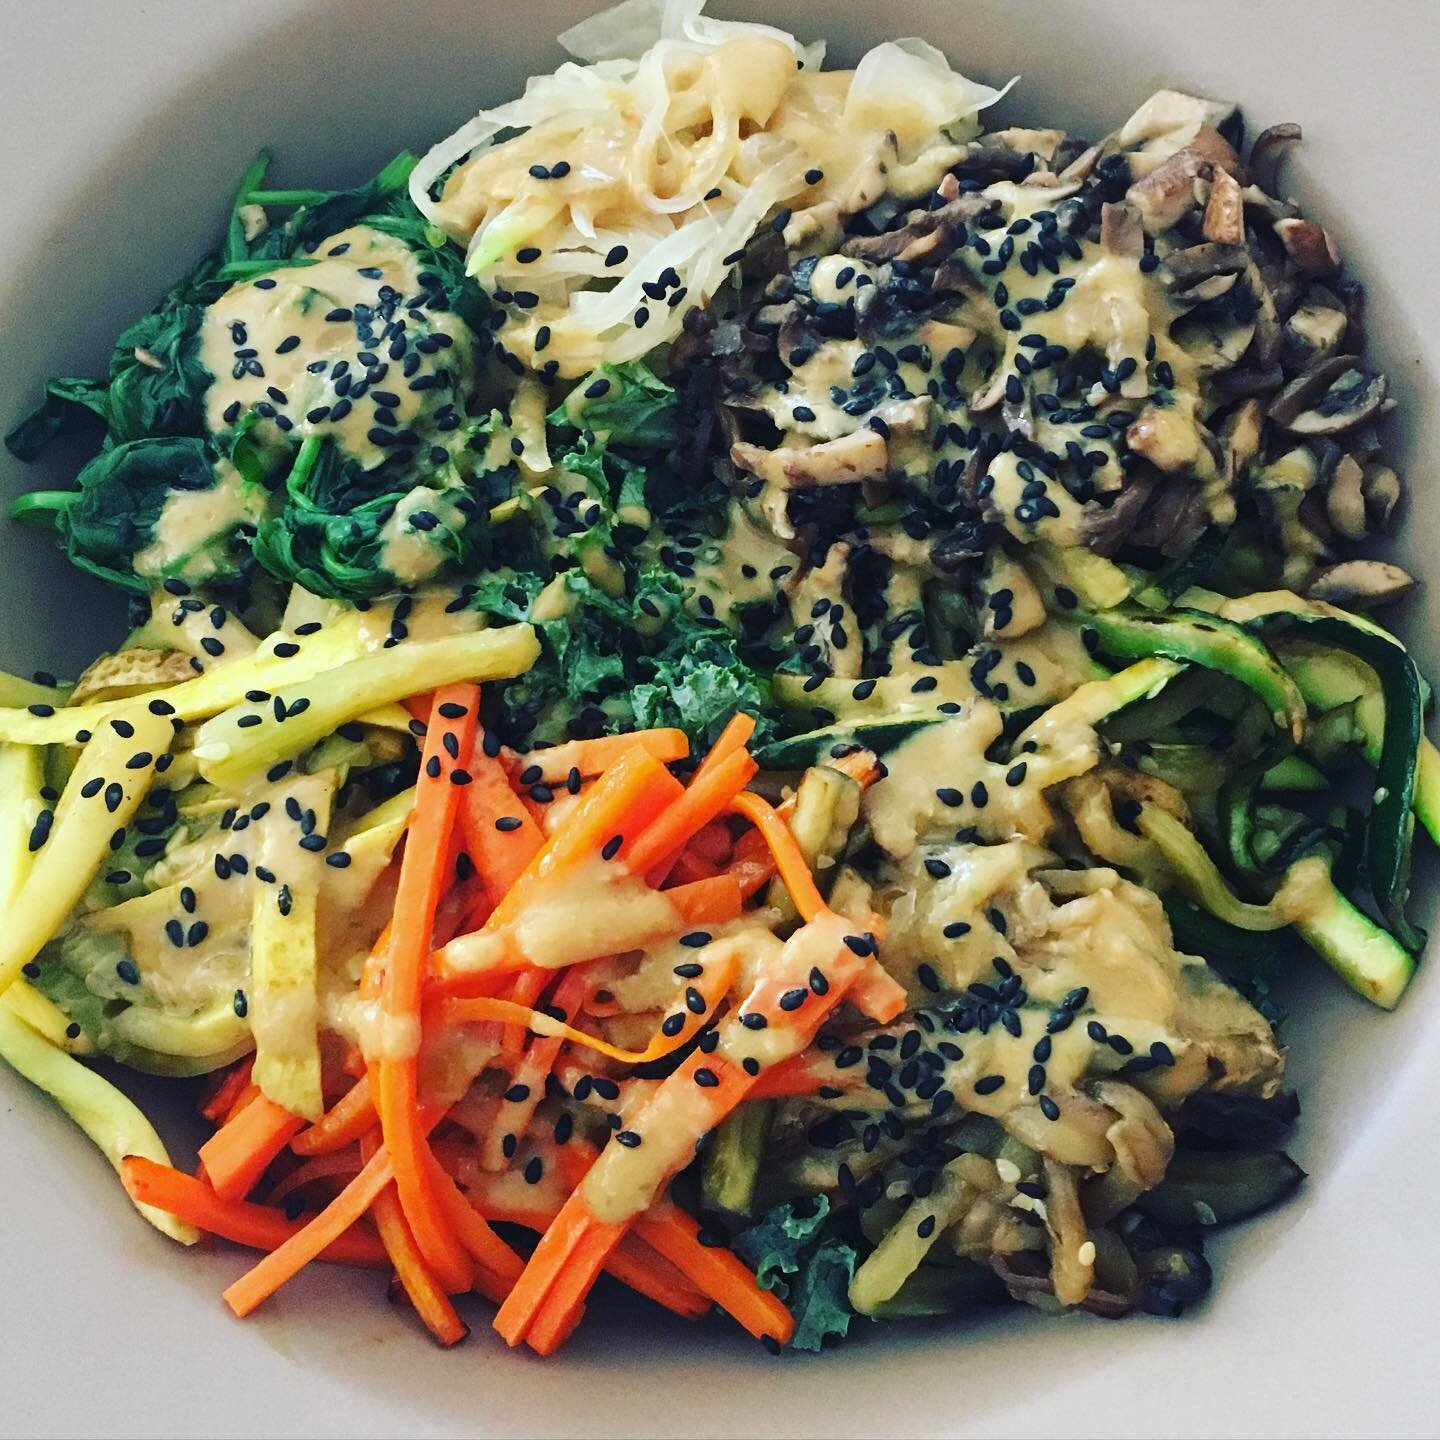 I once made a #vegan #bibimbap with a miso sauce and it was delicious! Check out my new episode of Mama Lieuw&rsquo;s Bibimbap tonight at 5:30pm PDT! Link in bio 🍲💕🧚🏻#koreanfood #easykoreancooking #koreancookingshow #foodporn #recipes #instafood 